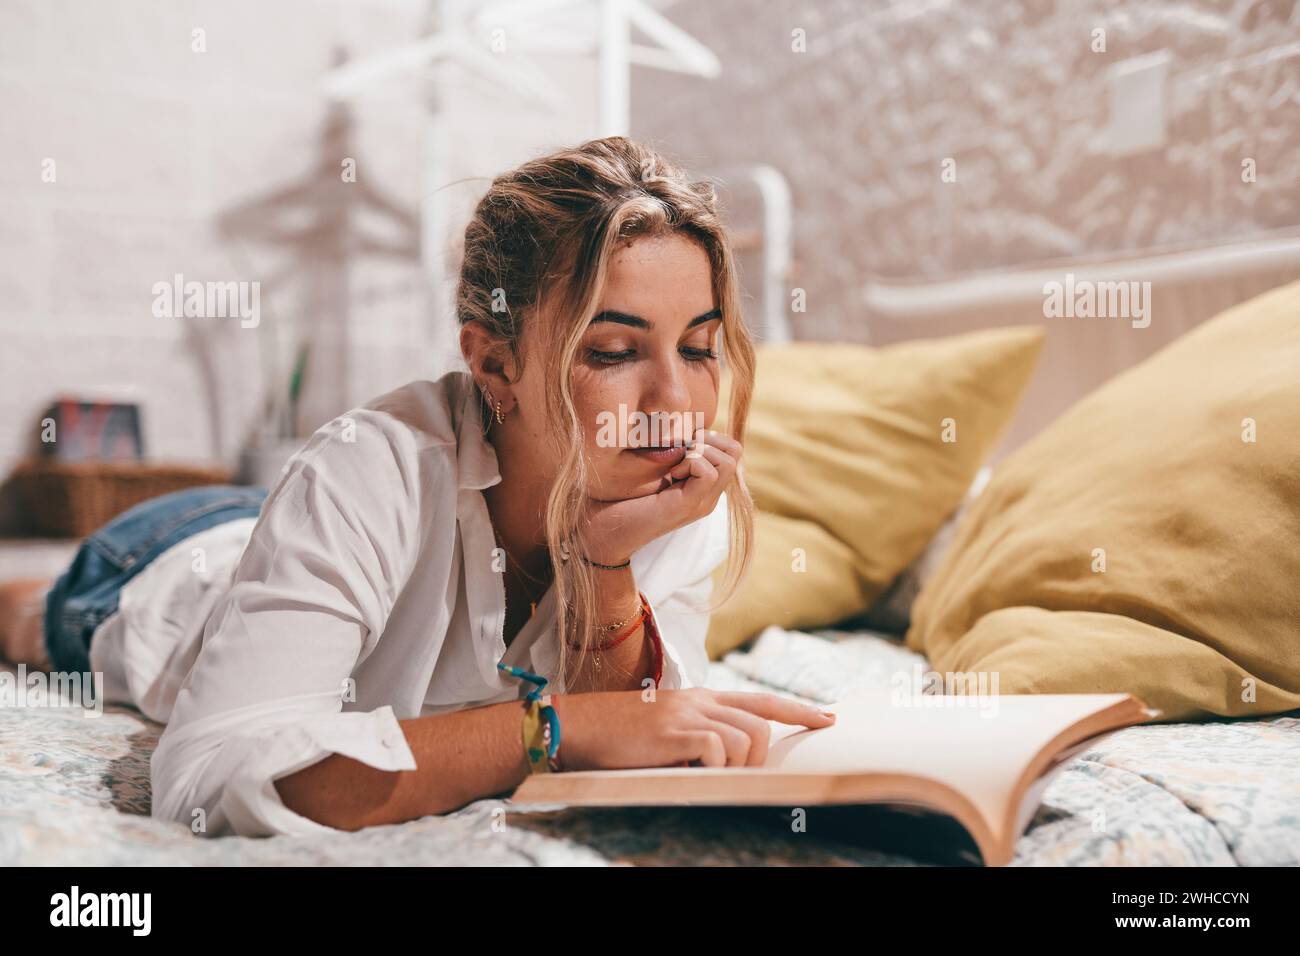 Young Caucasian girl relax lying in comfortable bedroom reading interesting book at home weekend, smiling millennial woman rest in cozy bed enjoy novel, hobby, relaxation concept Stock Photo